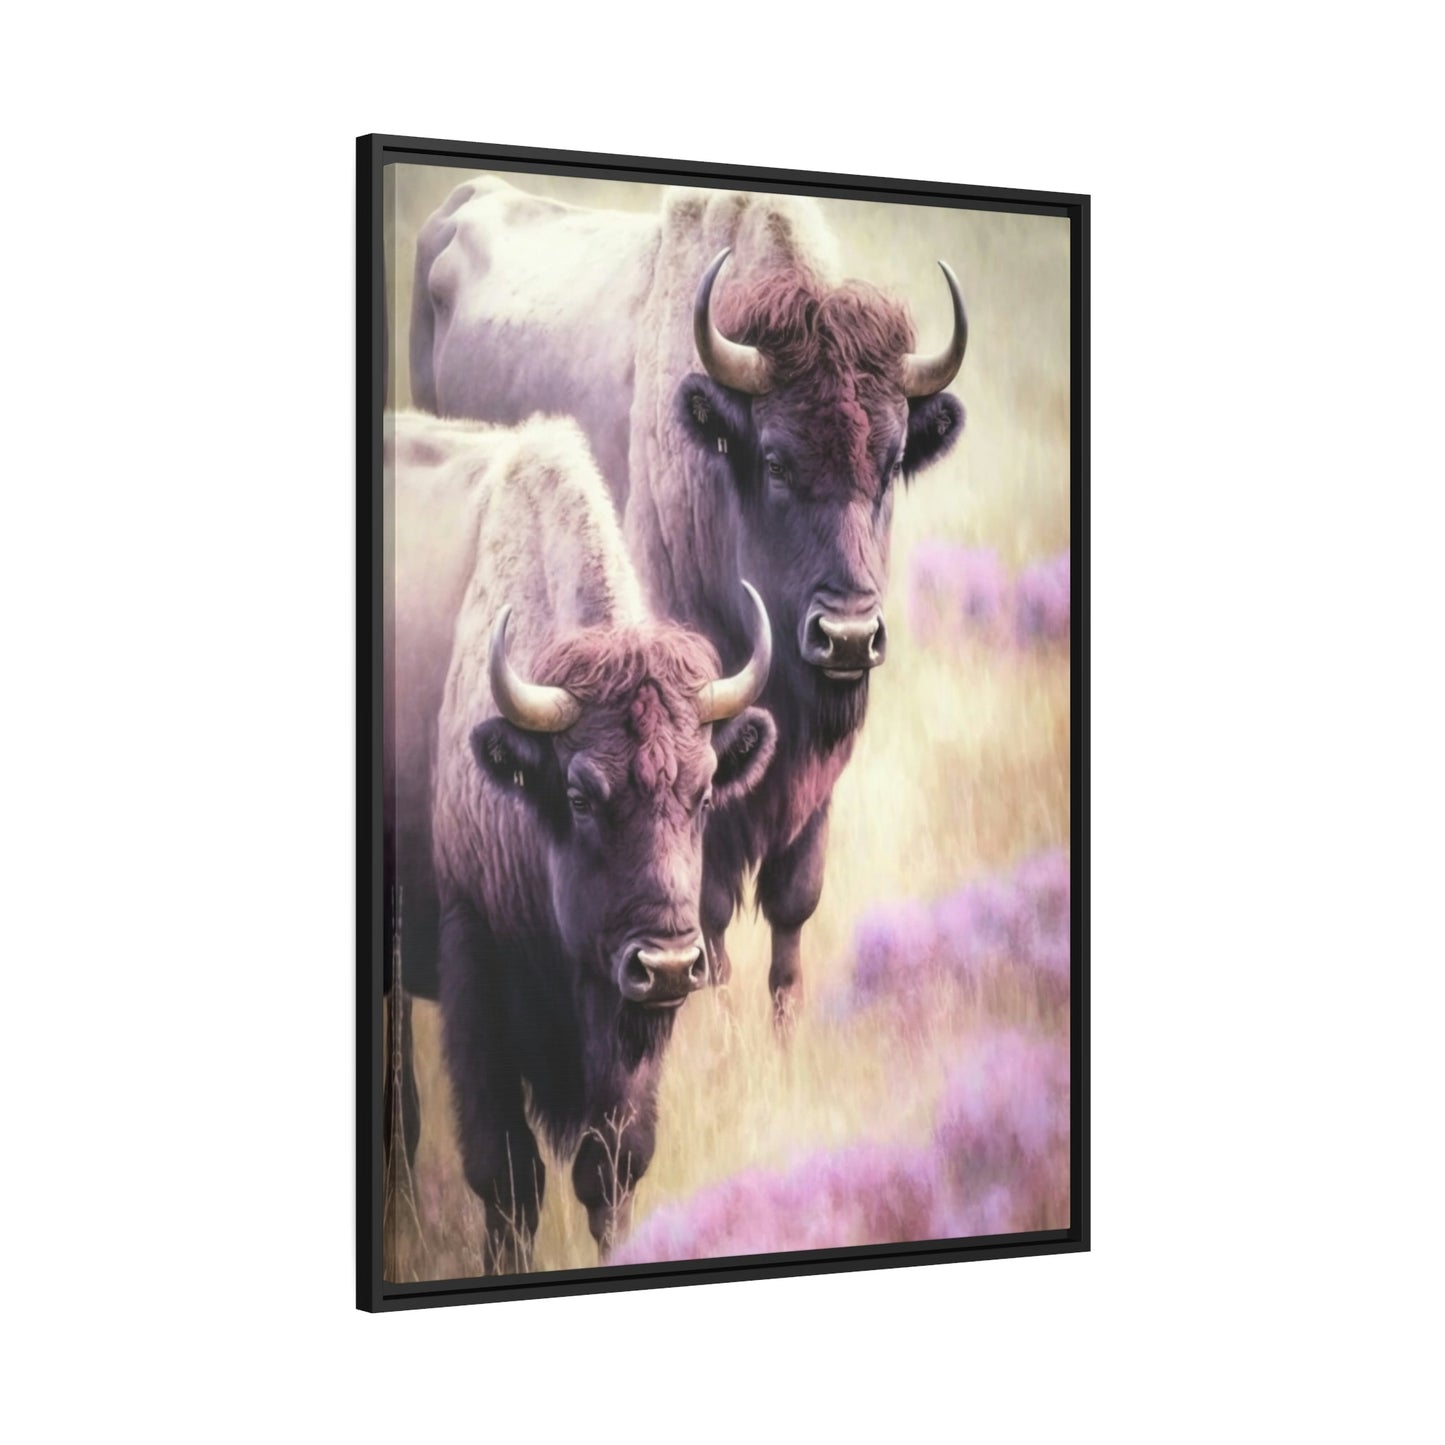 The Bison's Power: A Natural Canvas & Poster Painting of a Bisons at Its Prime